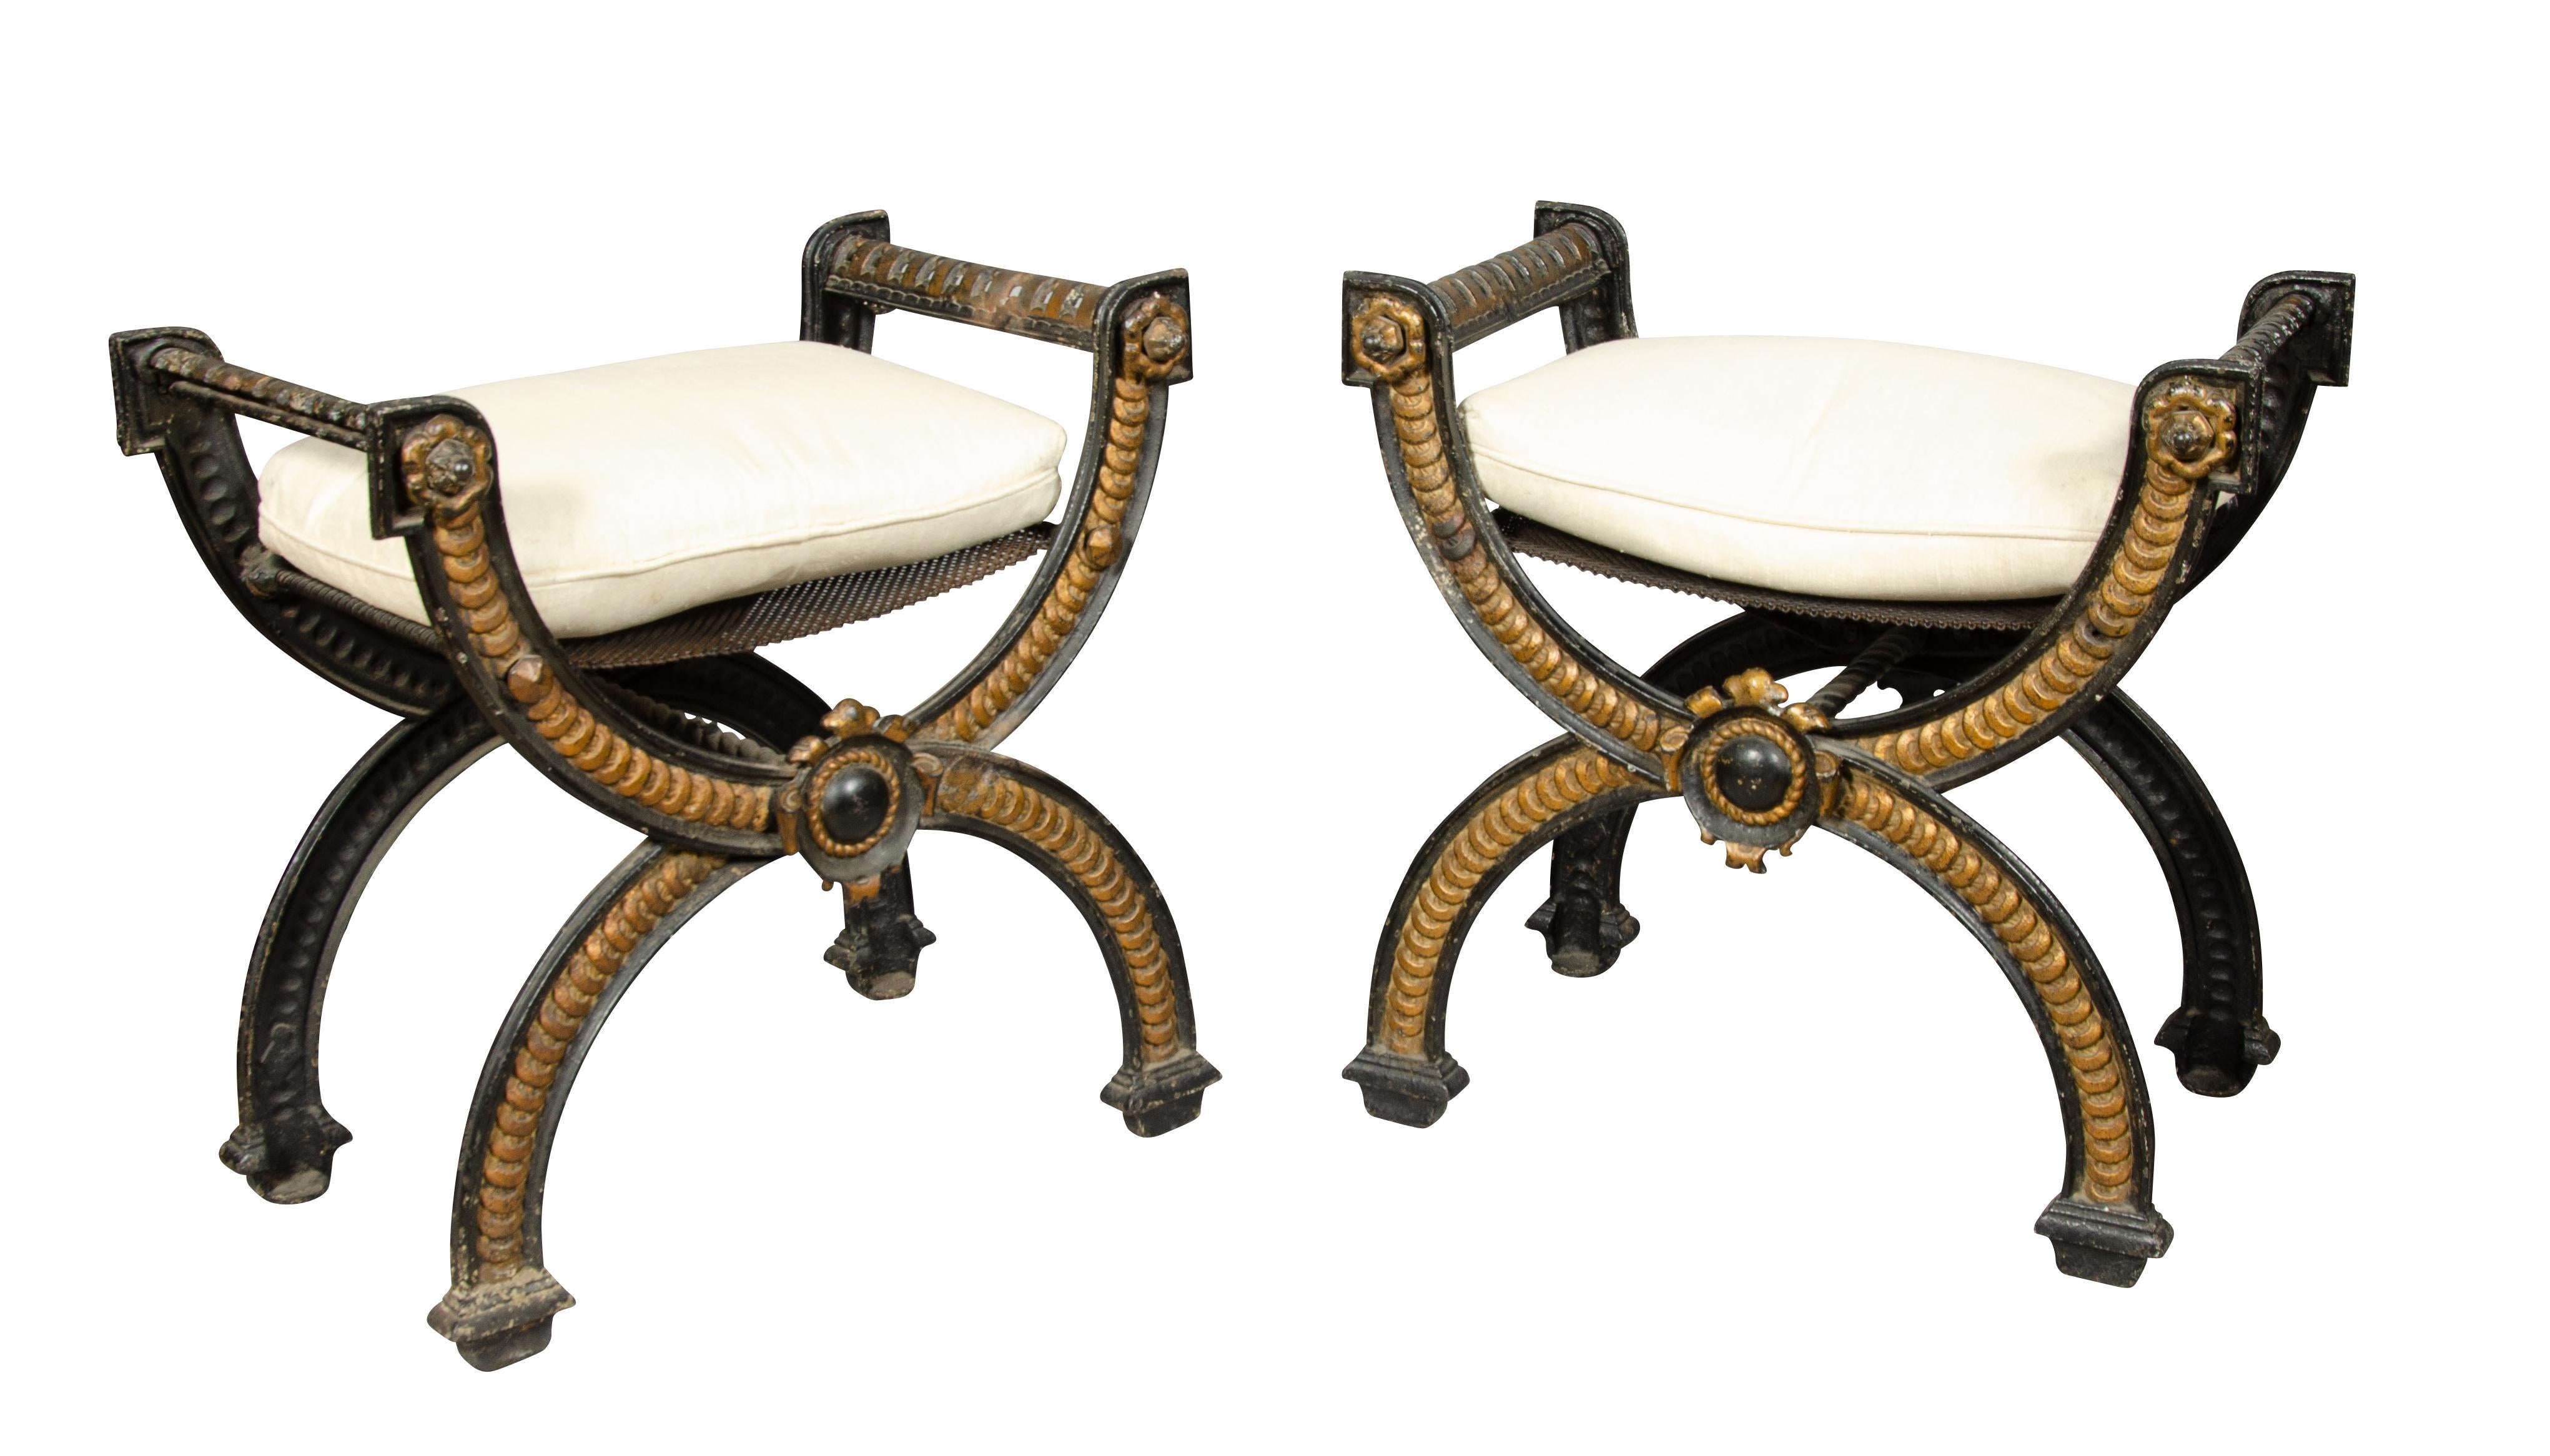 Painted black with gold decoration. Guilloche cast decoration on legs [overlapping coin]. Curule form inspired from ancient Greece. Cushion seat.